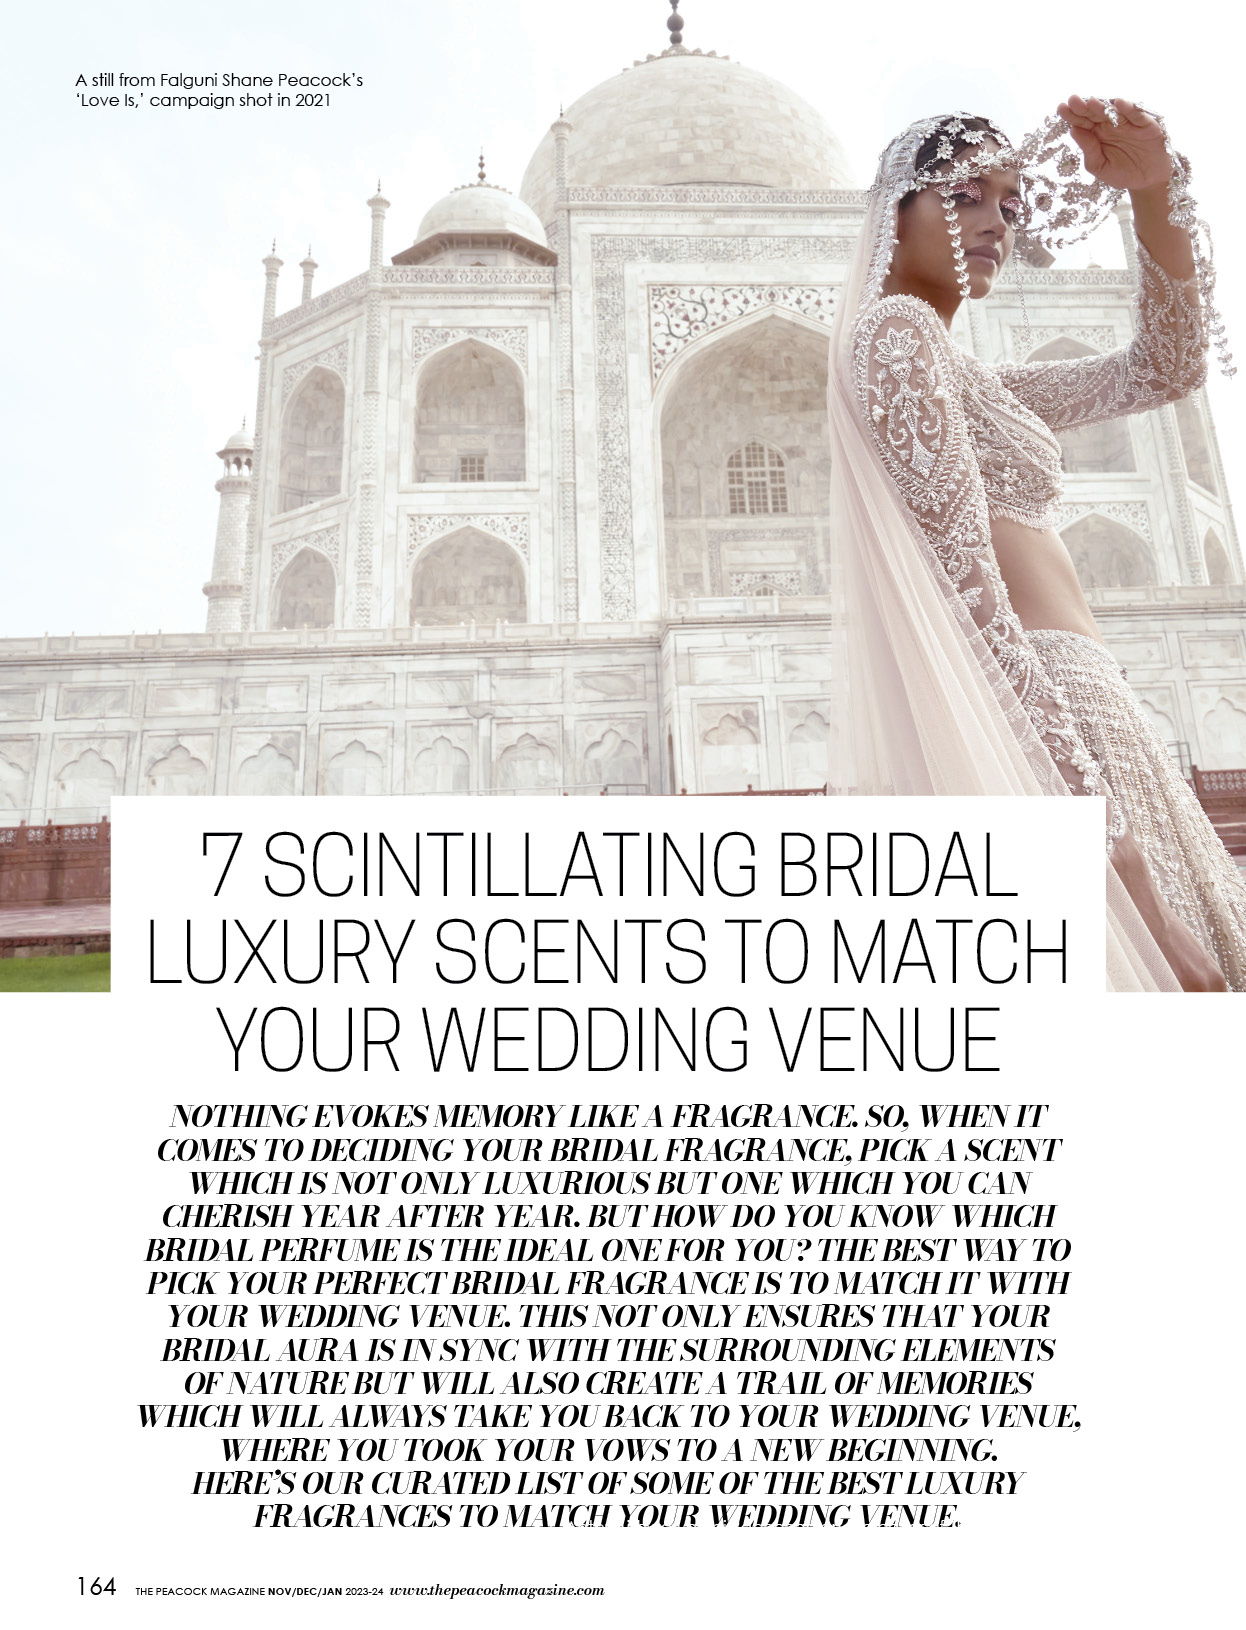 7 Scintillating Bridal Luxury Scents To Match Your Wedding Venue